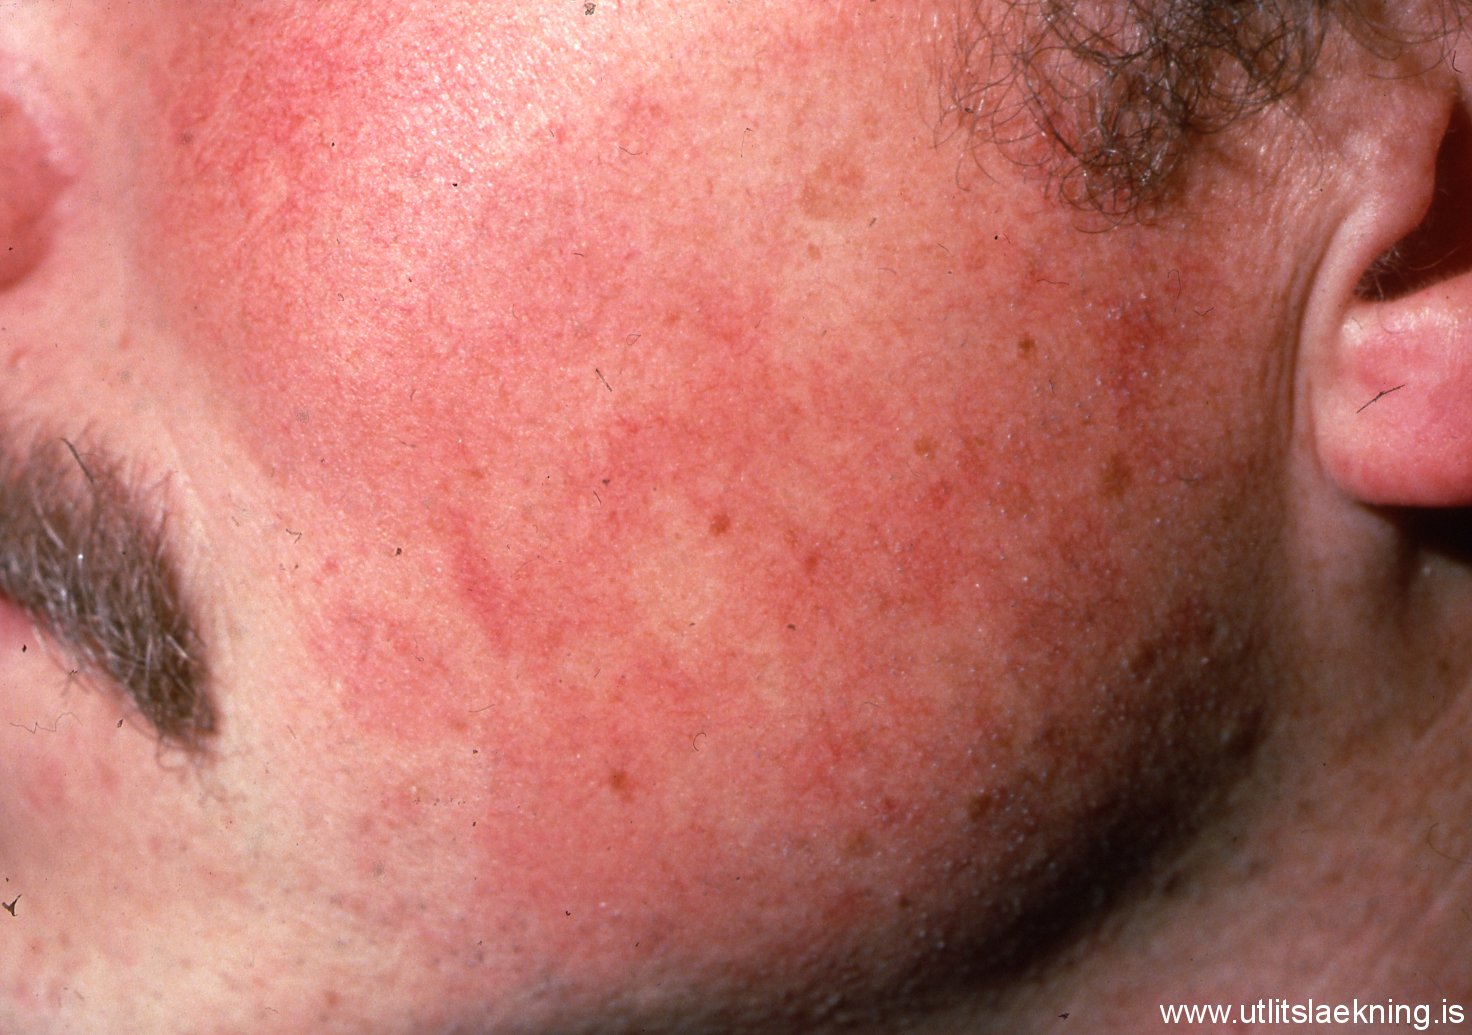 Keratosis Pilaris: Cause, Treatments, and Prevention - WebMD